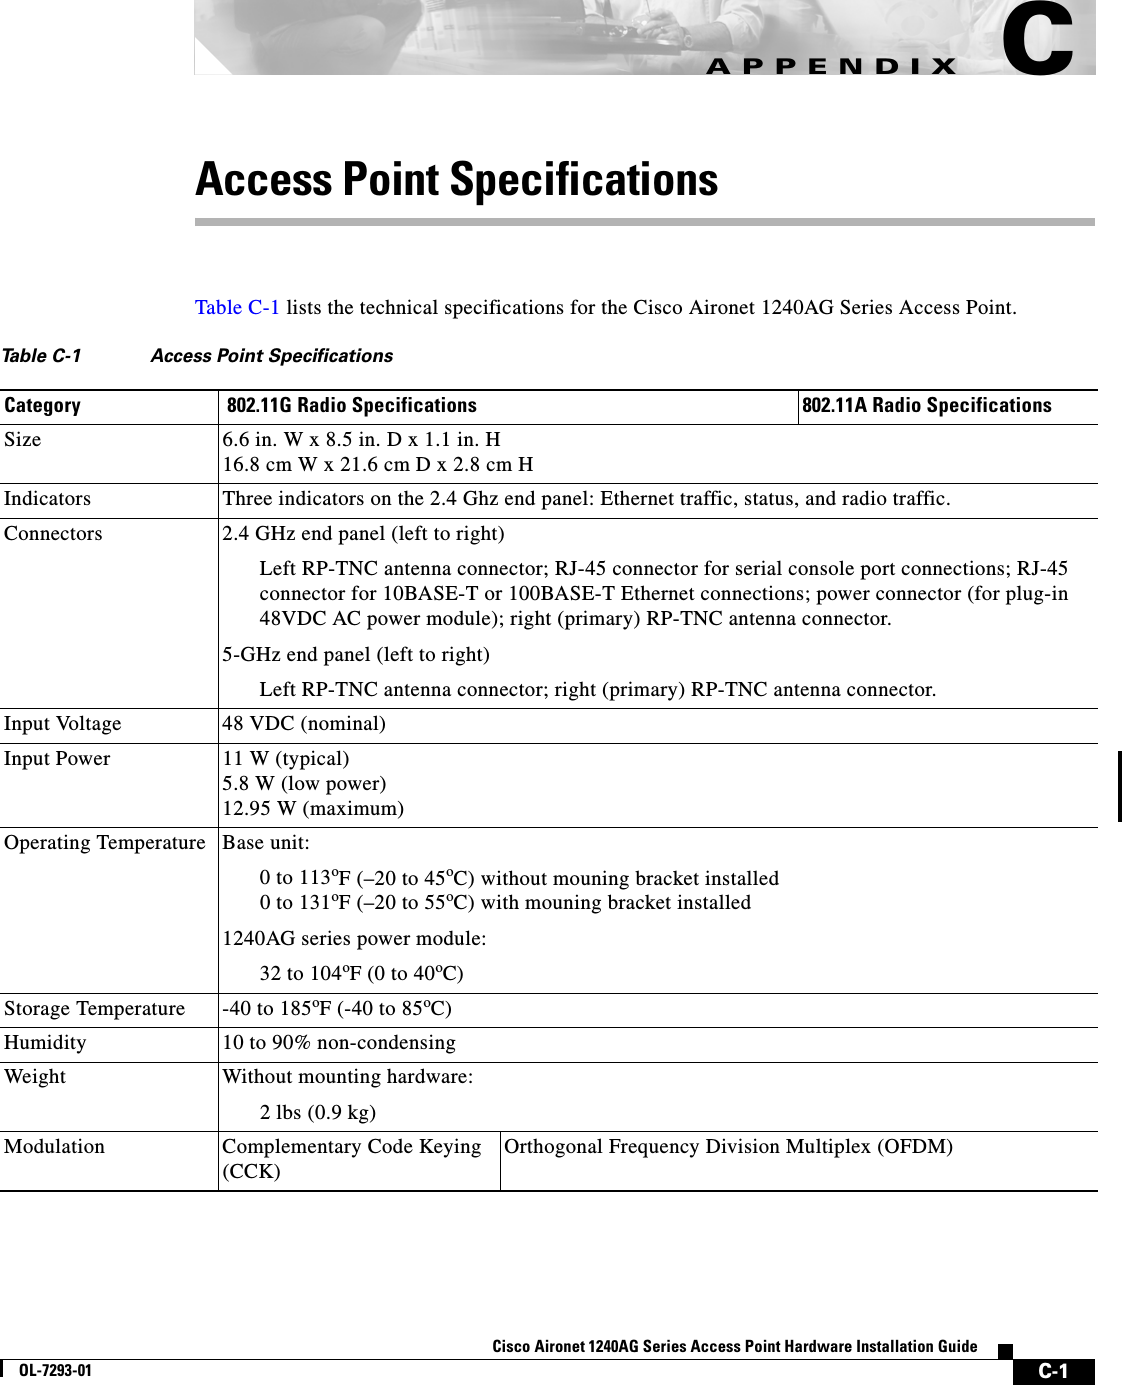  C-1Cisco Aironet 1240AG Series Access Point Hardware Installation GuideOL-7293-01APPENDIXCAccess Point Specifications Table C-1 lists the technical specifications for the Cisco Aironet 1240AG Series Access Point.  Table C-1 Access Point SpecificationsCategory  802.11G Radio Specifications 802.11A Radio SpecificationsSize 6.6 in. W x 8.5 in. D x 1.1 in. H 16.8 cm W x 21.6 cm D x 2.8 cm H Indicators Three indicators on the 2.4 Ghz end panel: Ethernet traffic, status, and radio traffic.Connectors 2.4 GHz end panel (left to right)Left RP-TNC antenna connector; RJ-45 connector for serial console port connections; RJ-45 connector for 10BASE-T or 100BASE-T Ethernet connections; power connector (for plug-in 48VDC AC power module); right (primary) RP-TNC antenna connector.5-GHz end panel (left to right)Left RP-TNC antenna connector; right (primary) RP-TNC antenna connector.Input Voltage  48 VDC (nominal)Input Power 11 W (typical)5.8 W (low power)12.95 W (maximum)Operating Temperature Base unit:0 to 113oF (–20 to 45oC) without mouning bracket installed0 to 131oF (–20 to 55oC) with mouning bracket installed1240AG series power module:32 to 104oF (0 to 40oC)Storage Temperature -40 to 185oF (-40 to 85oC)Humidity 10 to 90% non-condensingWeight Without mounting hardware:2 lbs (0.9 kg) Modulation Complementary Code Keying (CCK)Orthogonal Frequency Division Multiplex (OFDM)